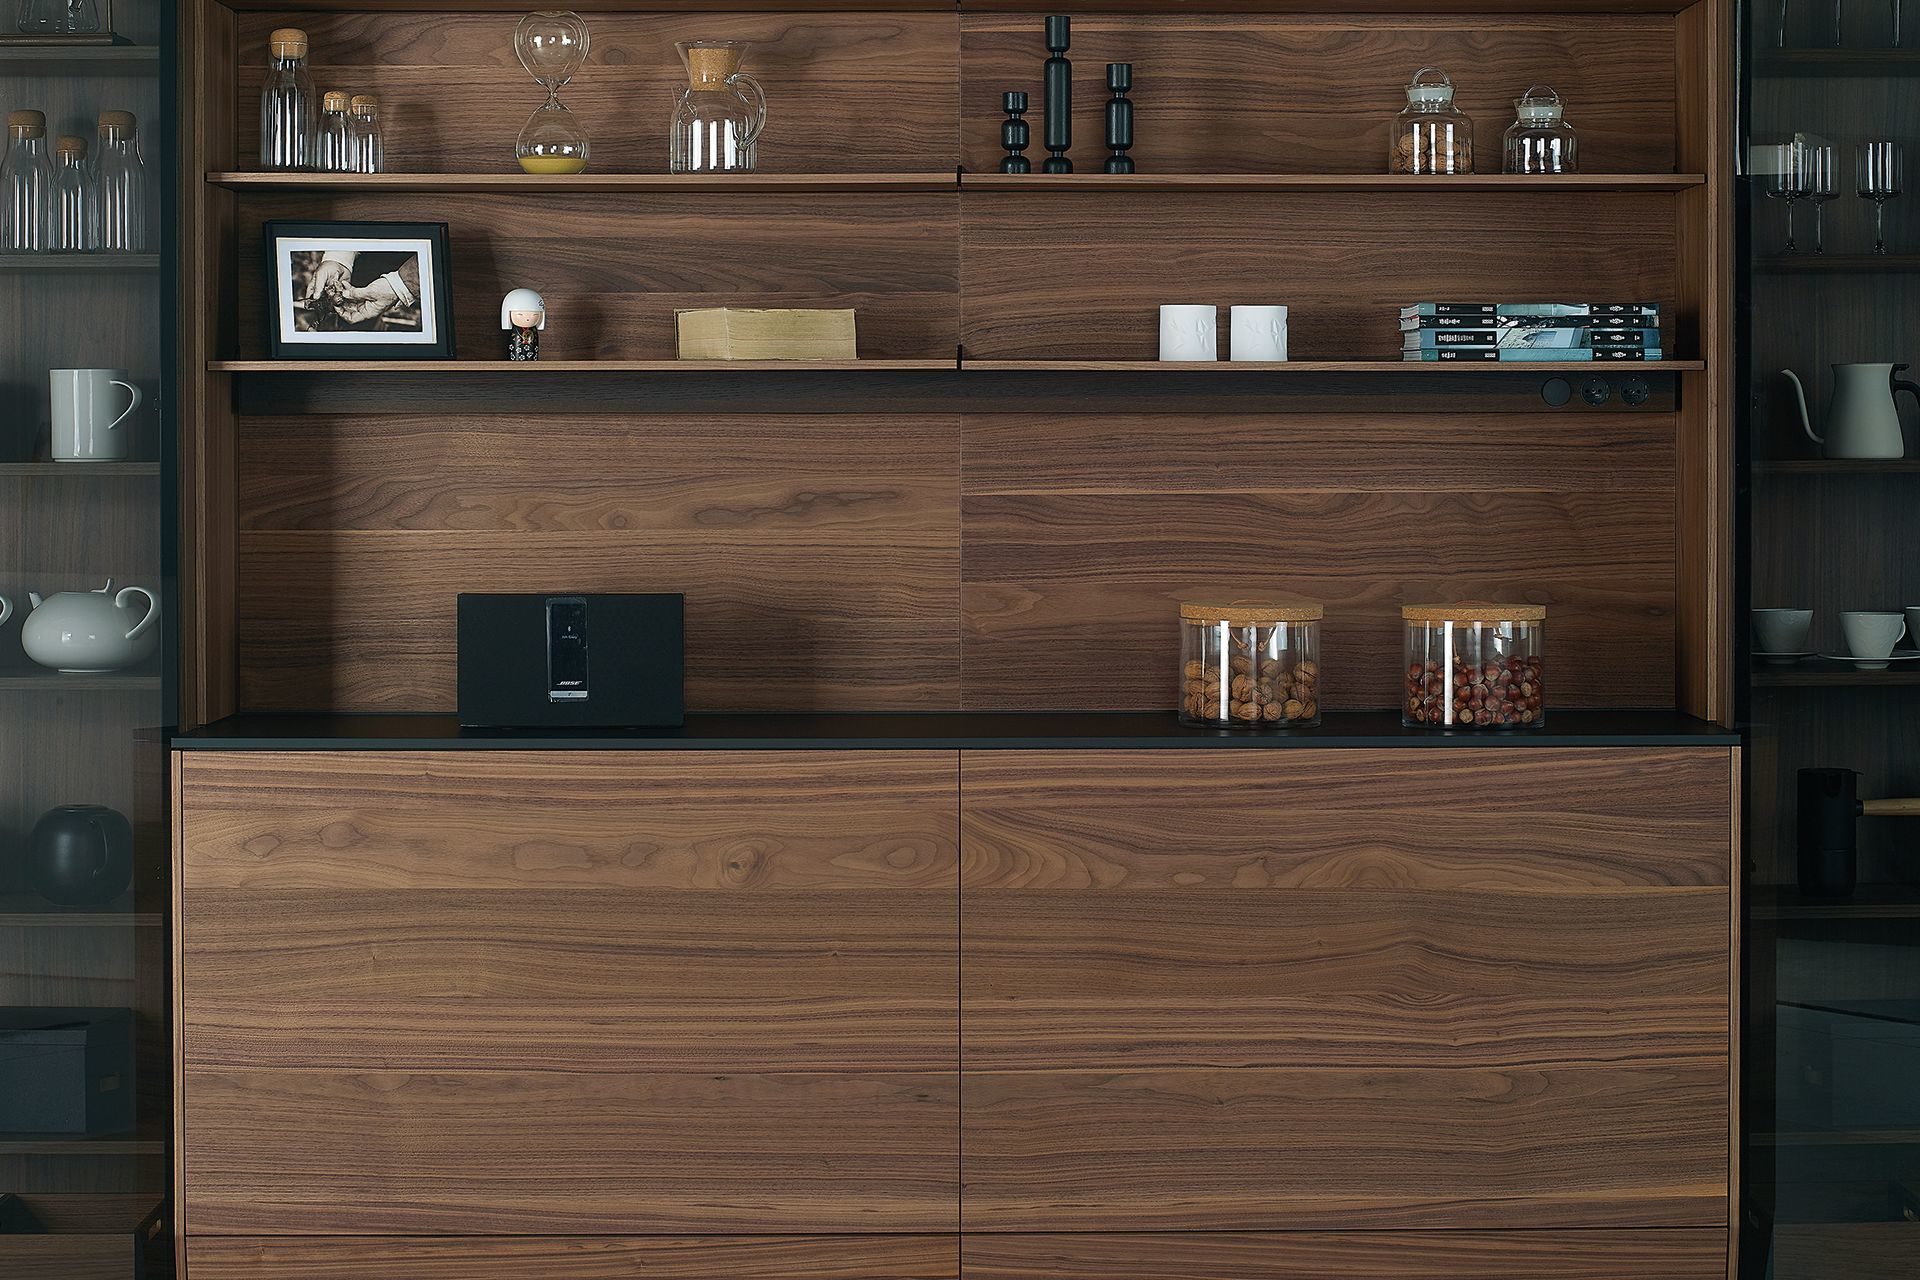 Image of an American Walnut veneer display cabinet and sideboard with base units and shelves